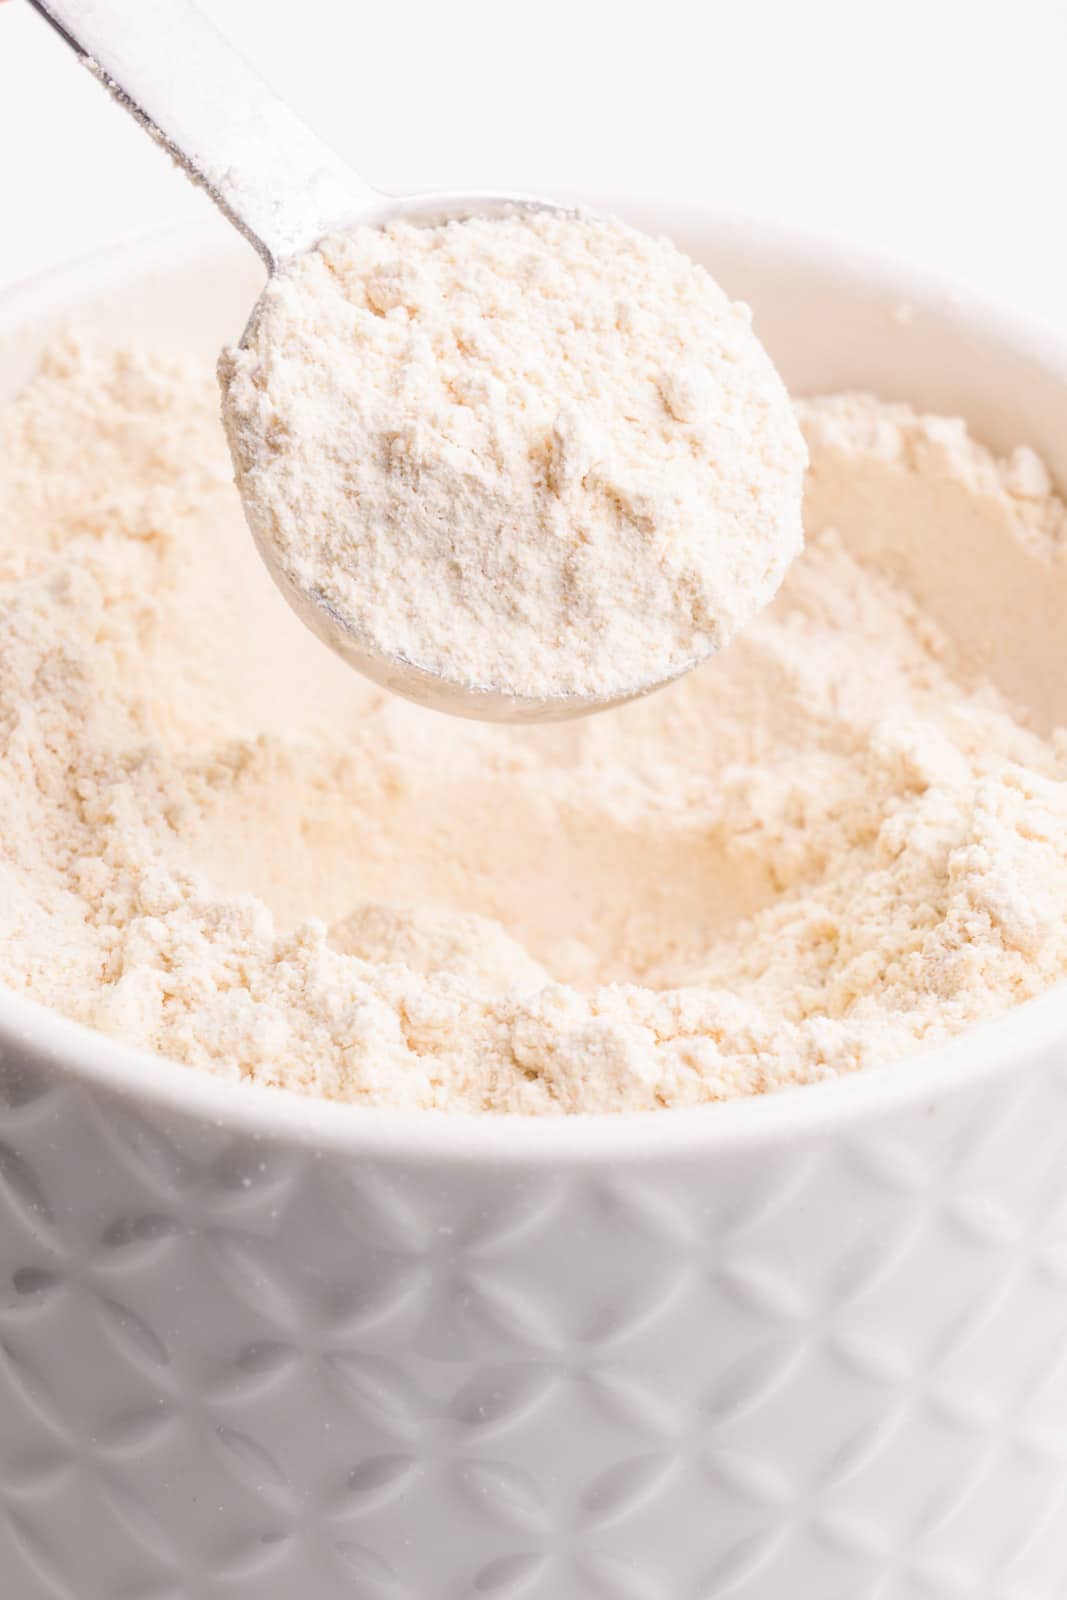 Pantry 101: All-purpose flour vs. cake and pastry flour